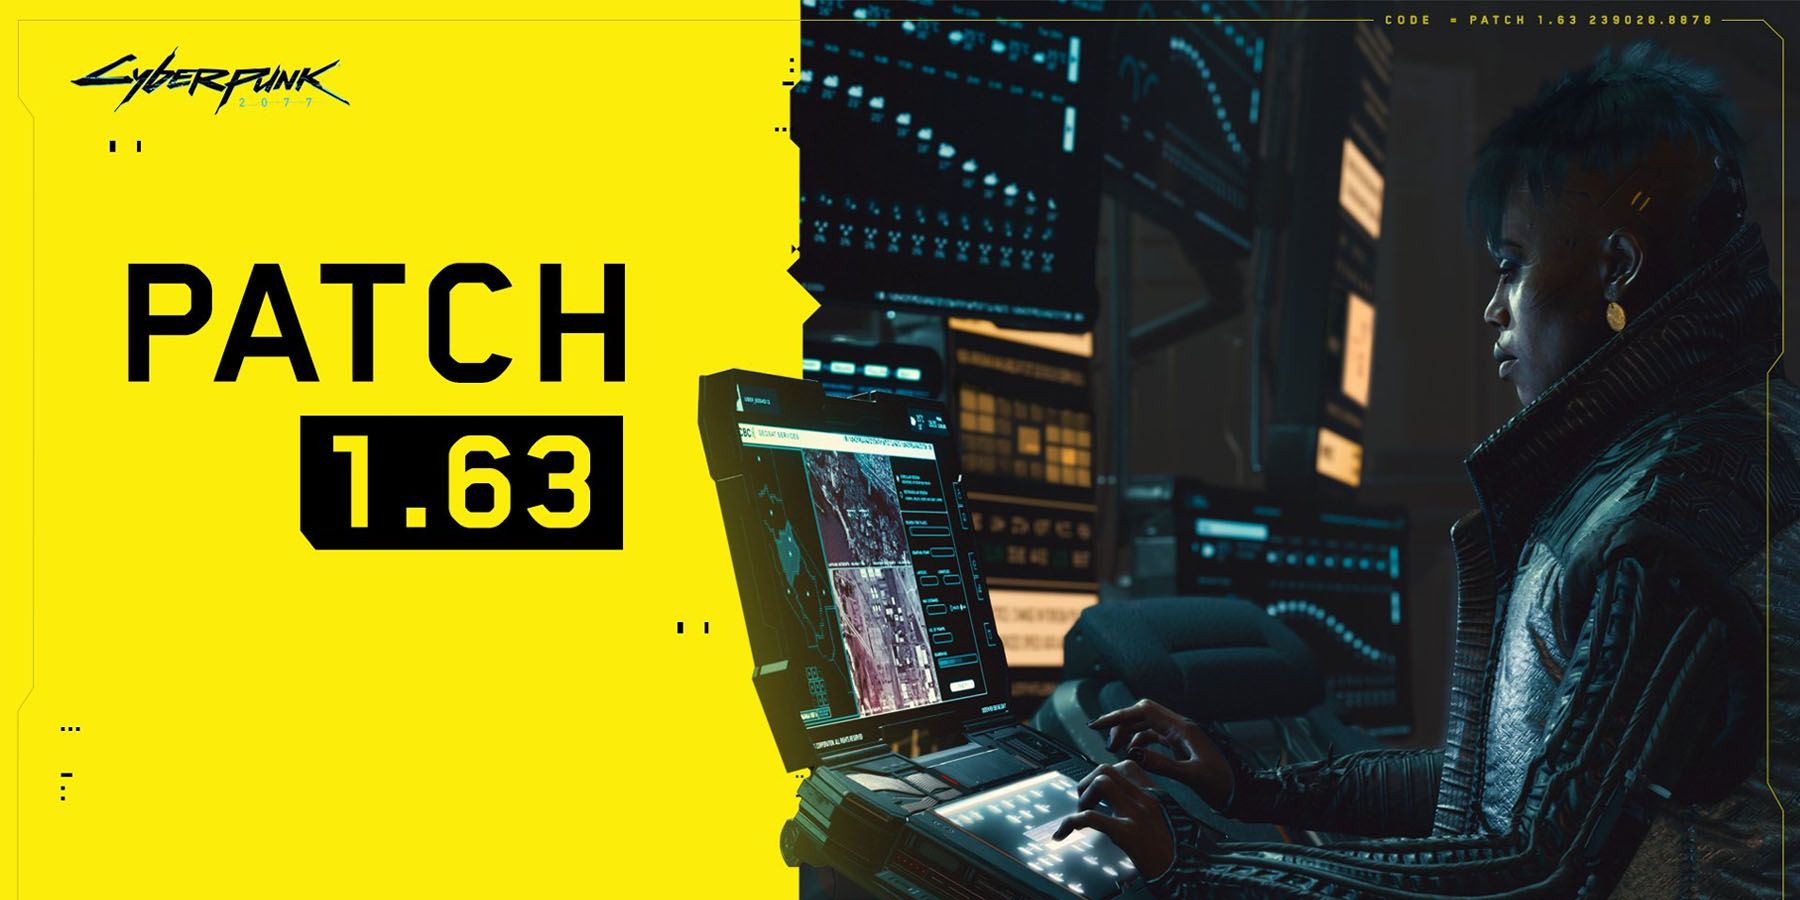 A promotional image for Cyberpunk 2077's Patch 1.63 update, featuring a hacker at their computer in front of a yellow background.